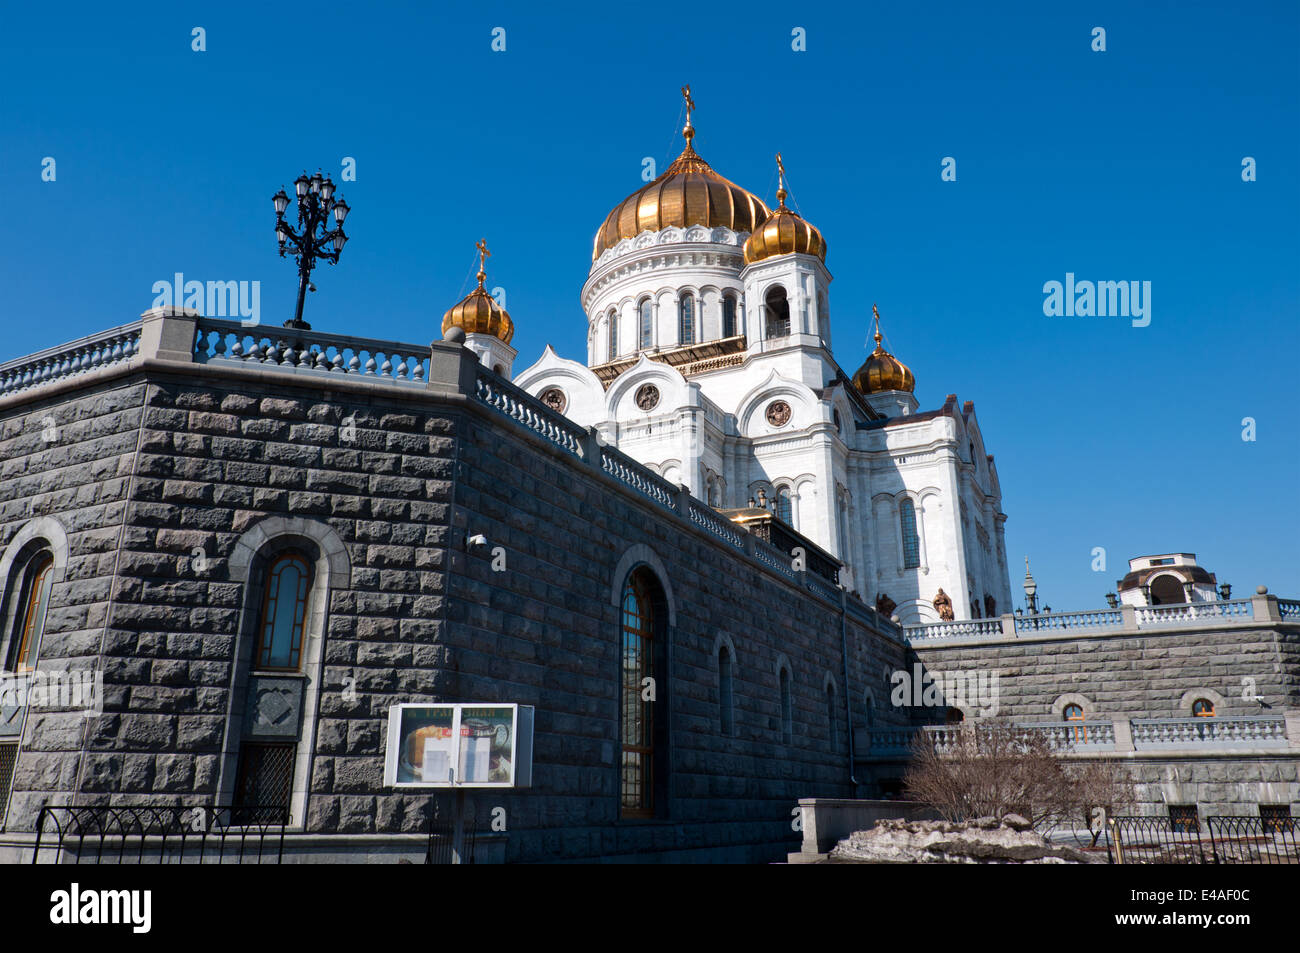 moscow Russia Orthodox Christianity church religion faith architecture Russian town city cathedral white dome gold majestic maje Stock Photo